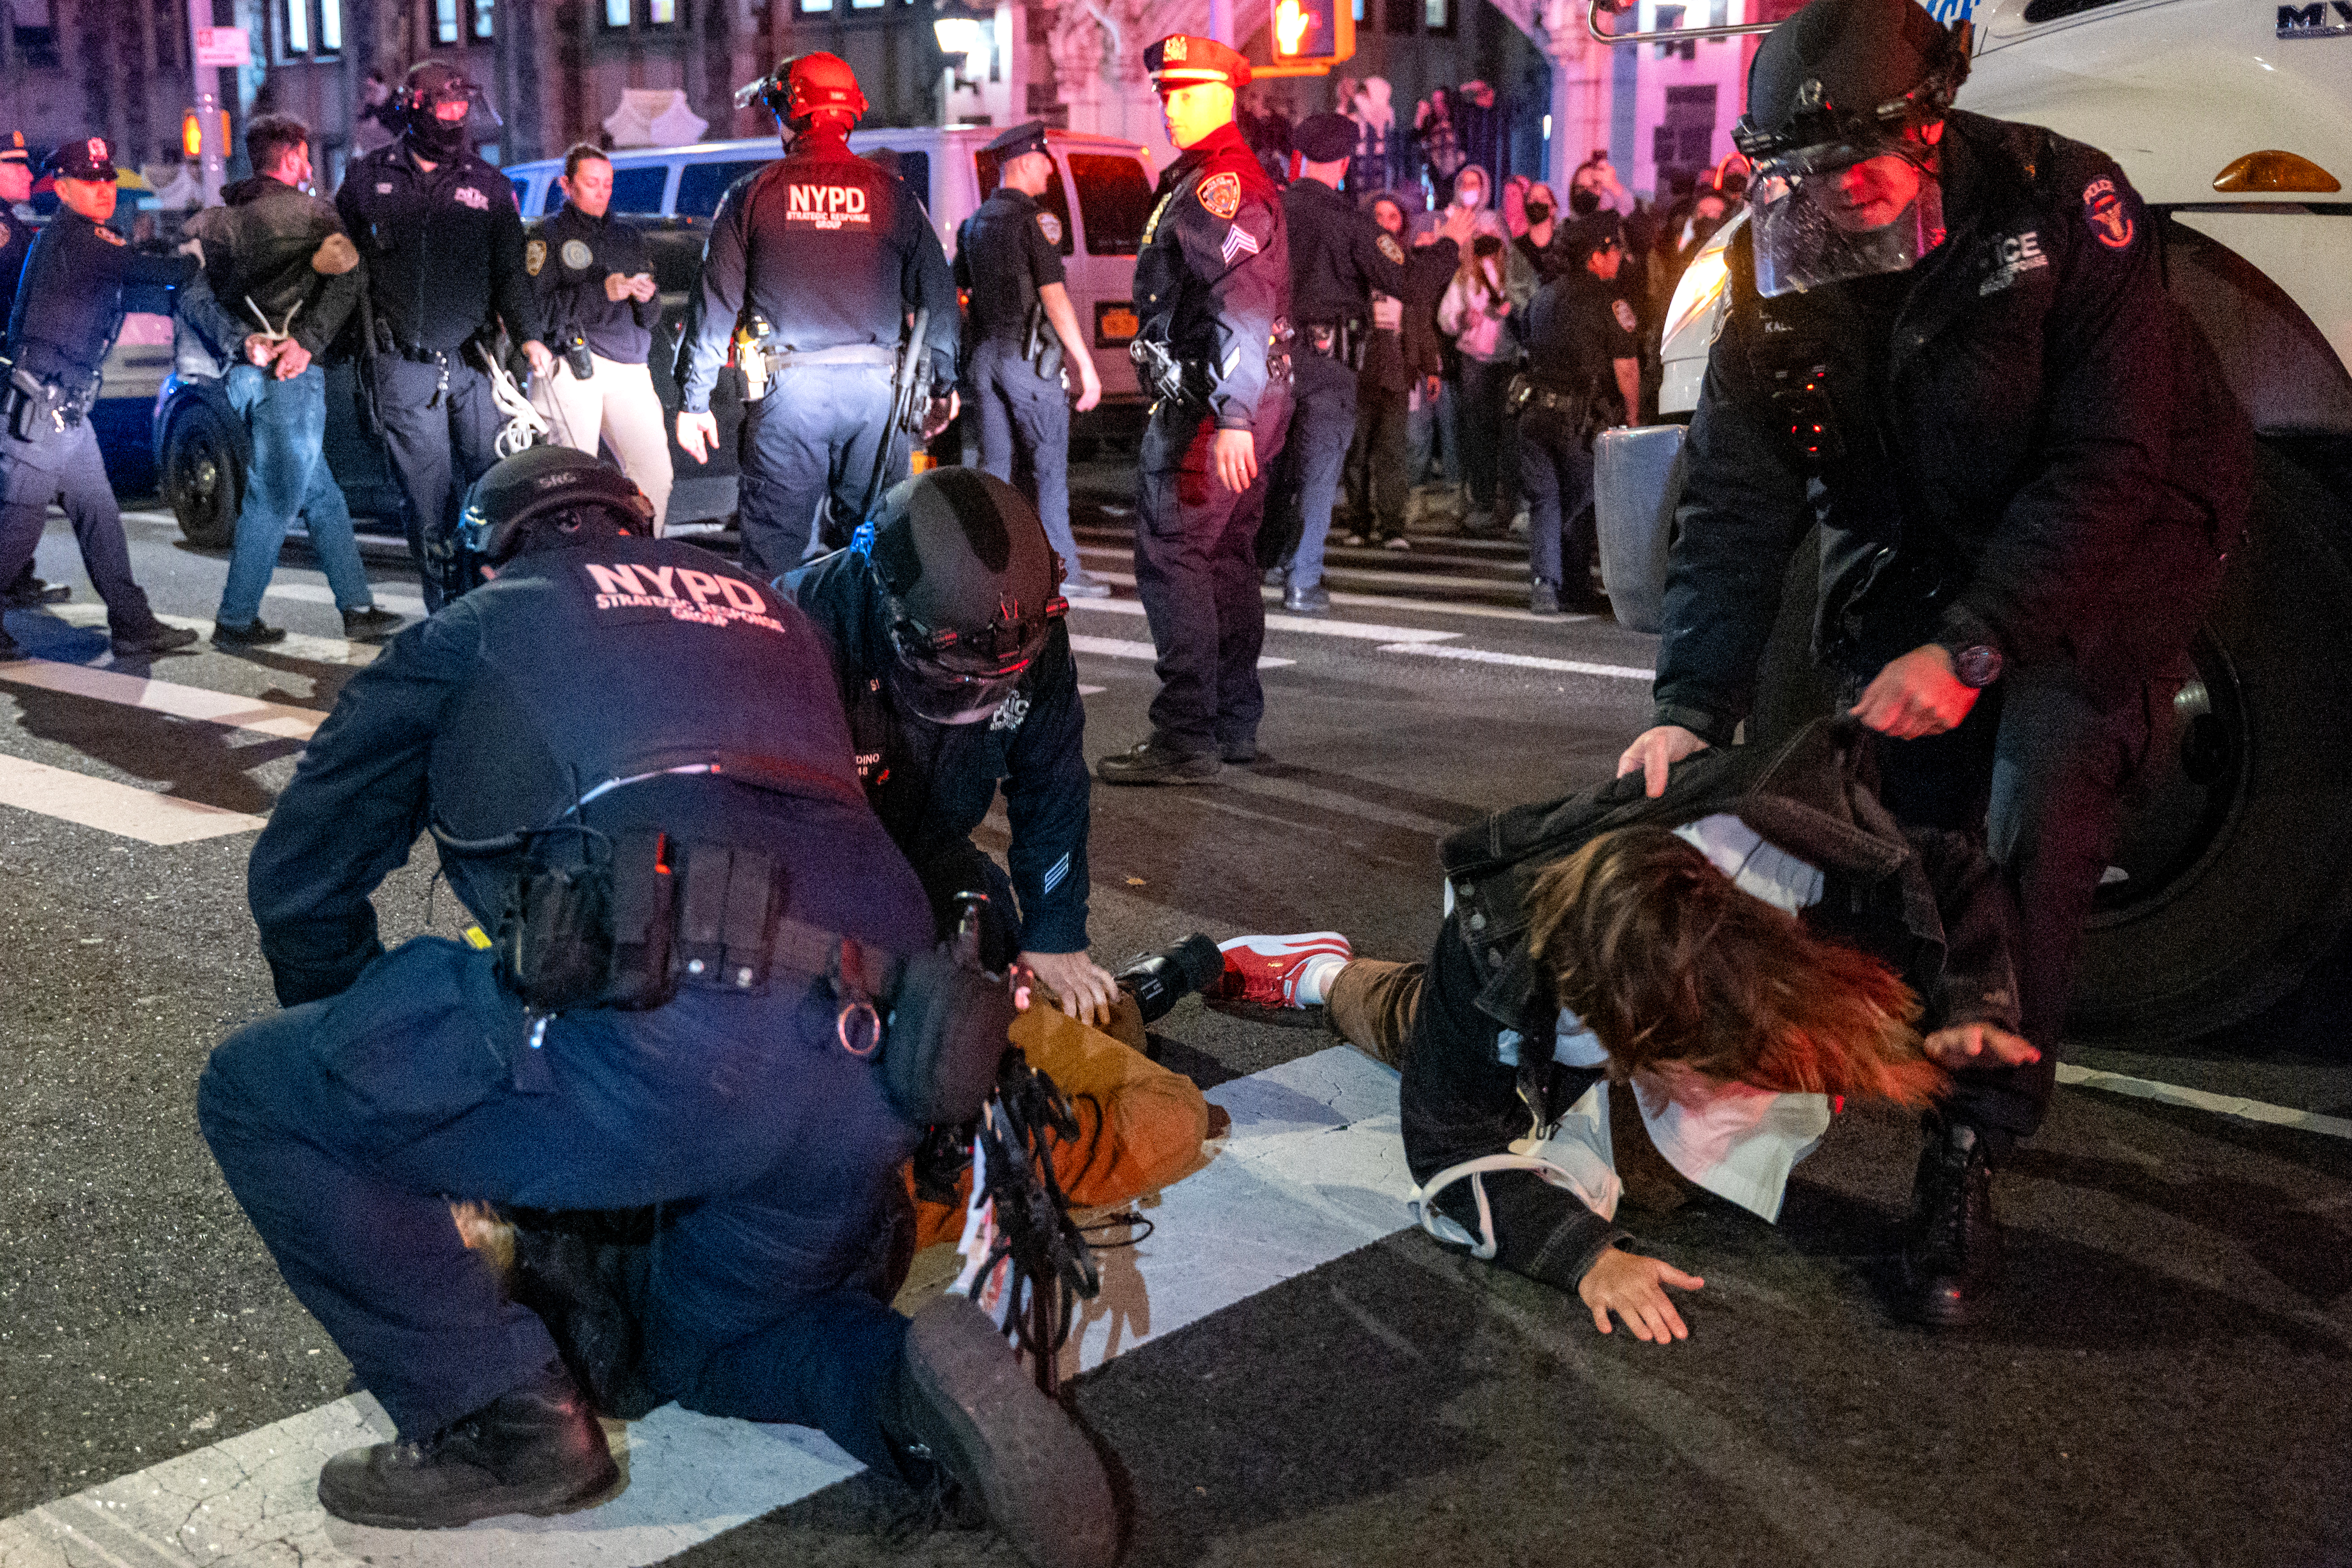 DRIVE TIME: Did NYPD use excessive force during college protests?